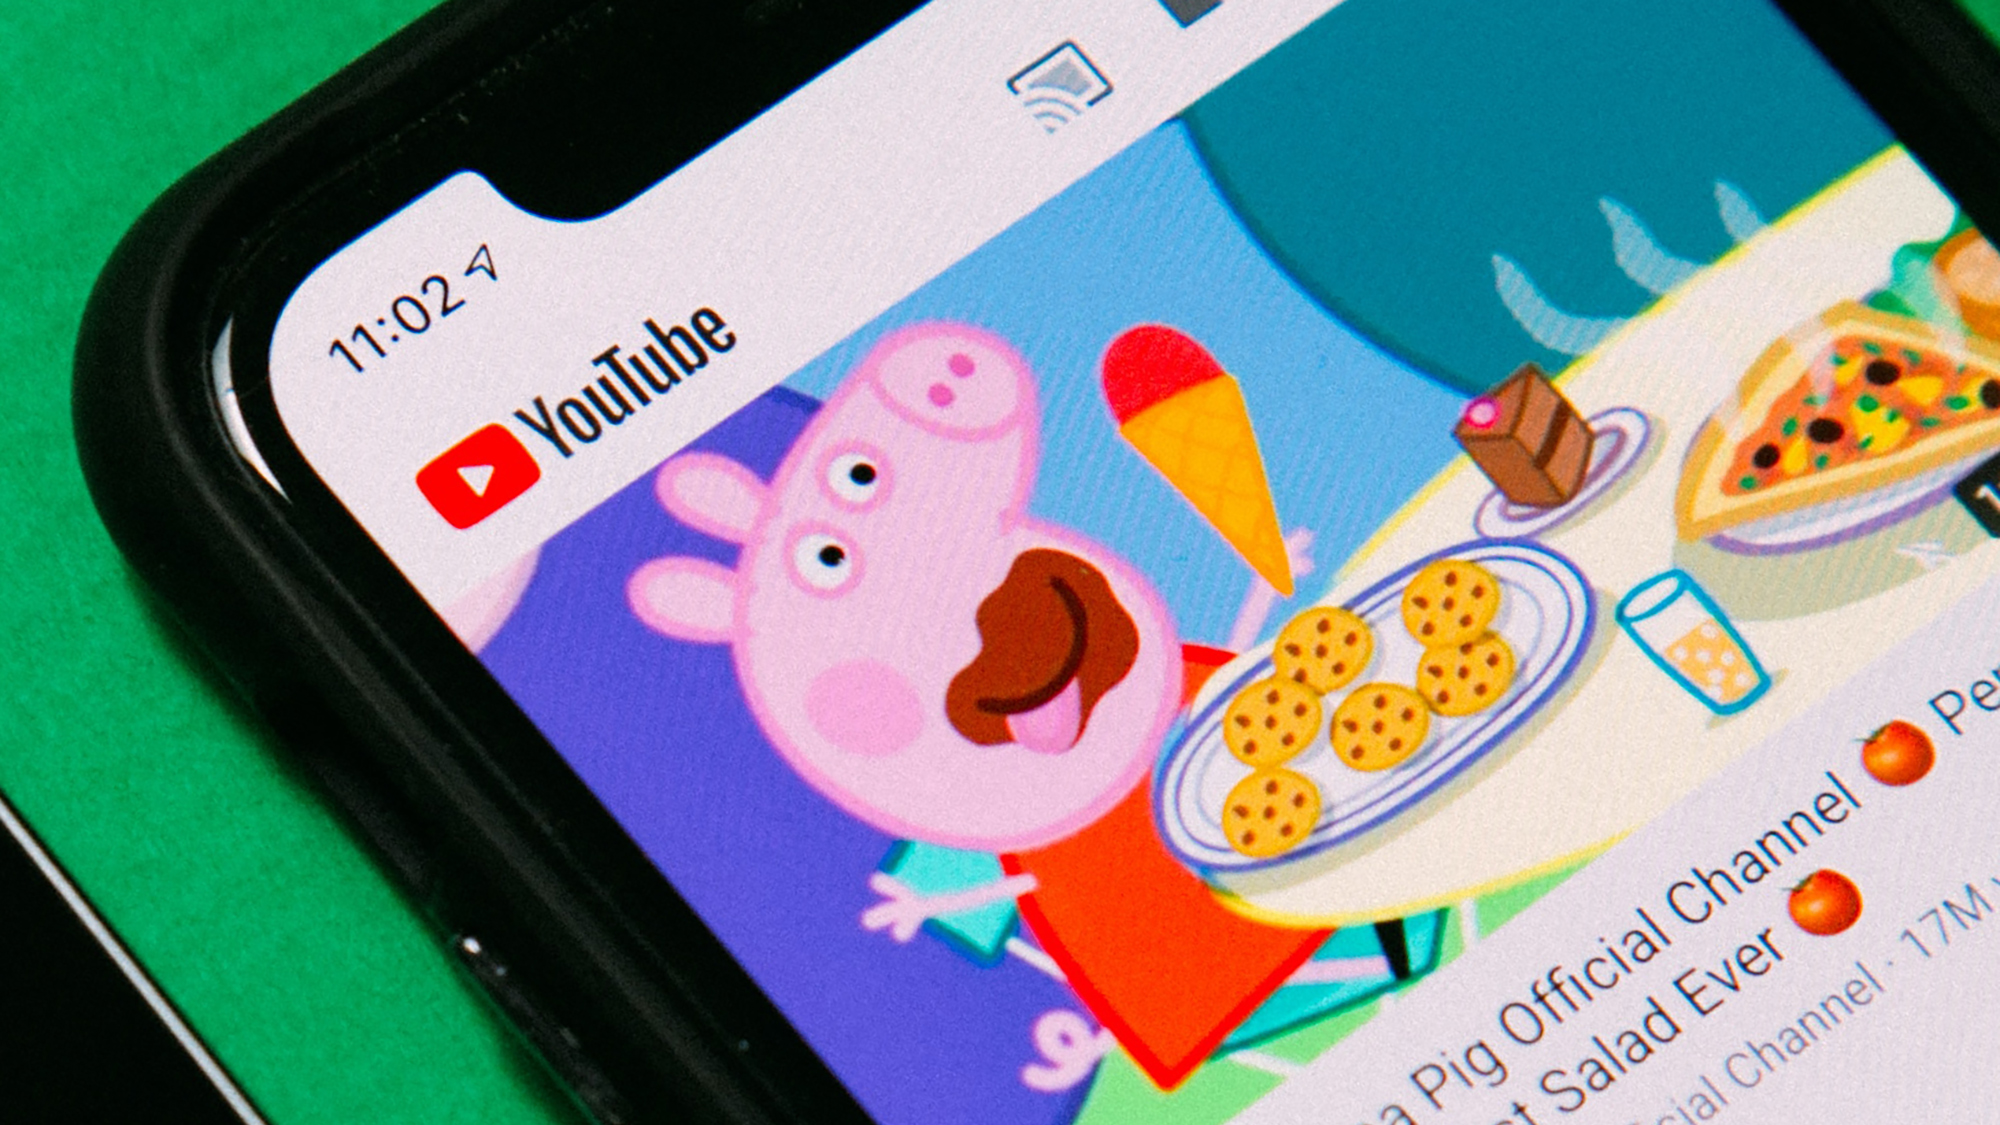 The YouTube mobile app on a phone, with a Peppa Pig video queued up to download or watch.